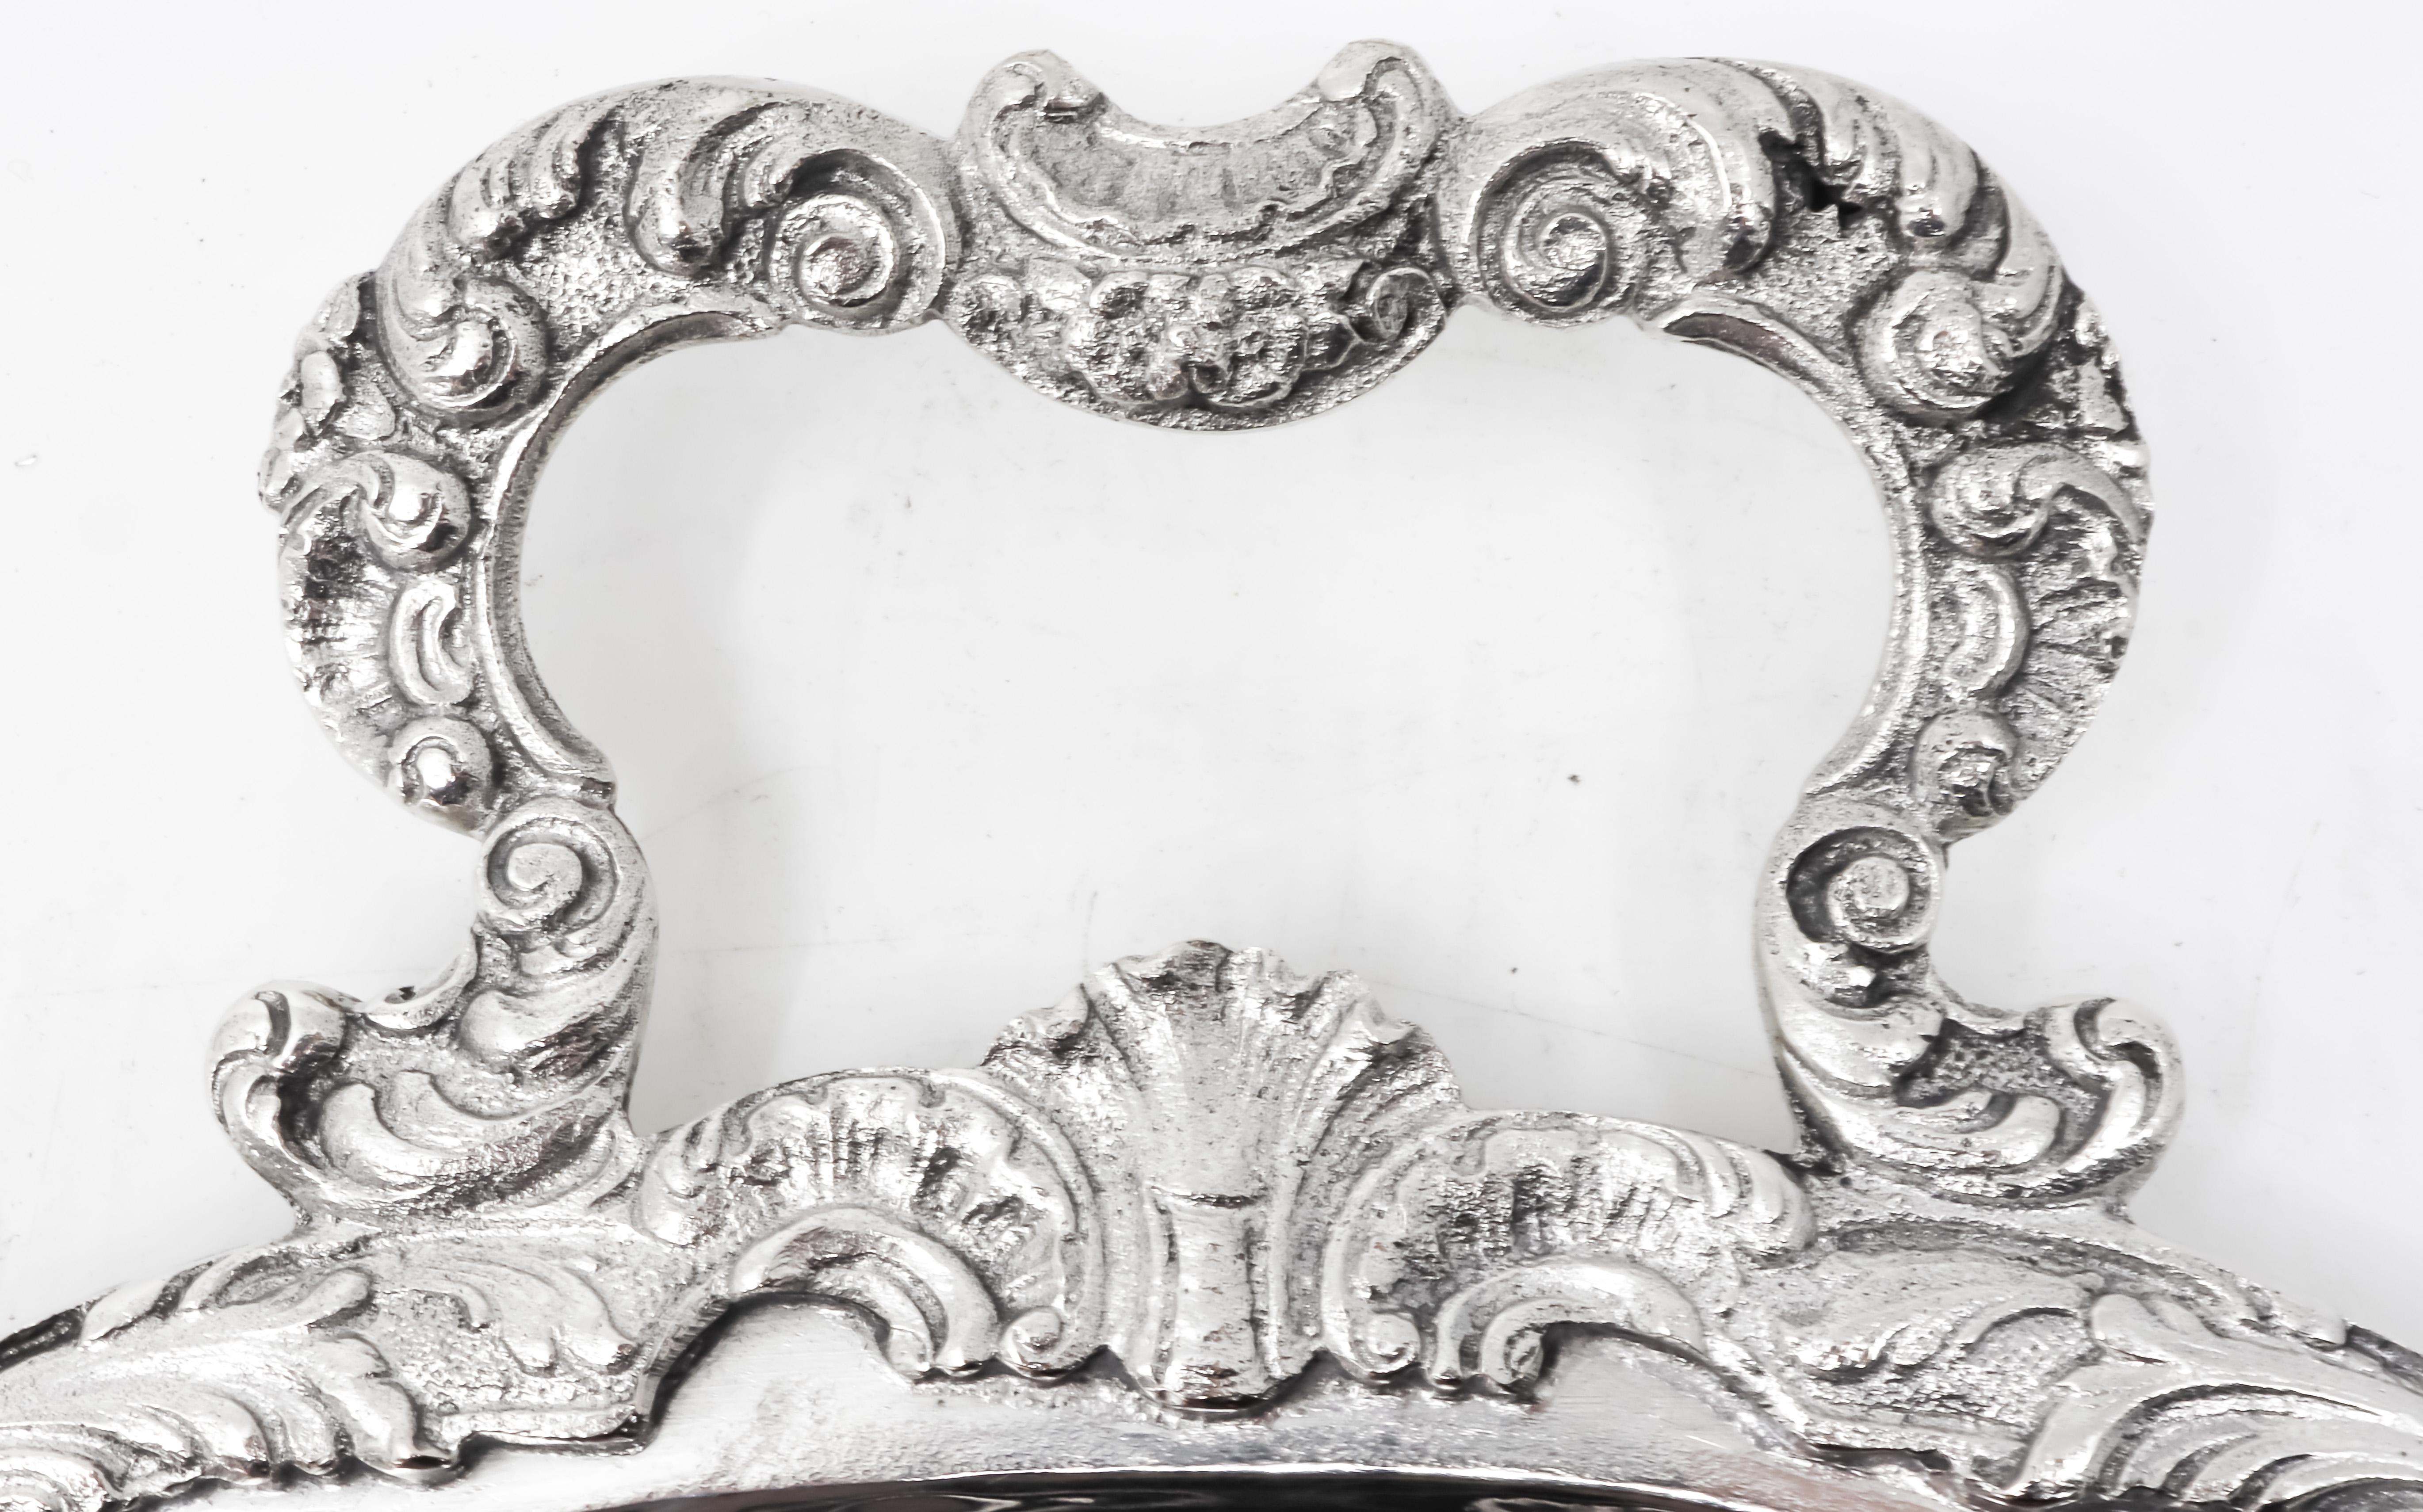 Serving Silver Tray, German Late 19th-Early 20th Century, Silver 800 For Sale 1